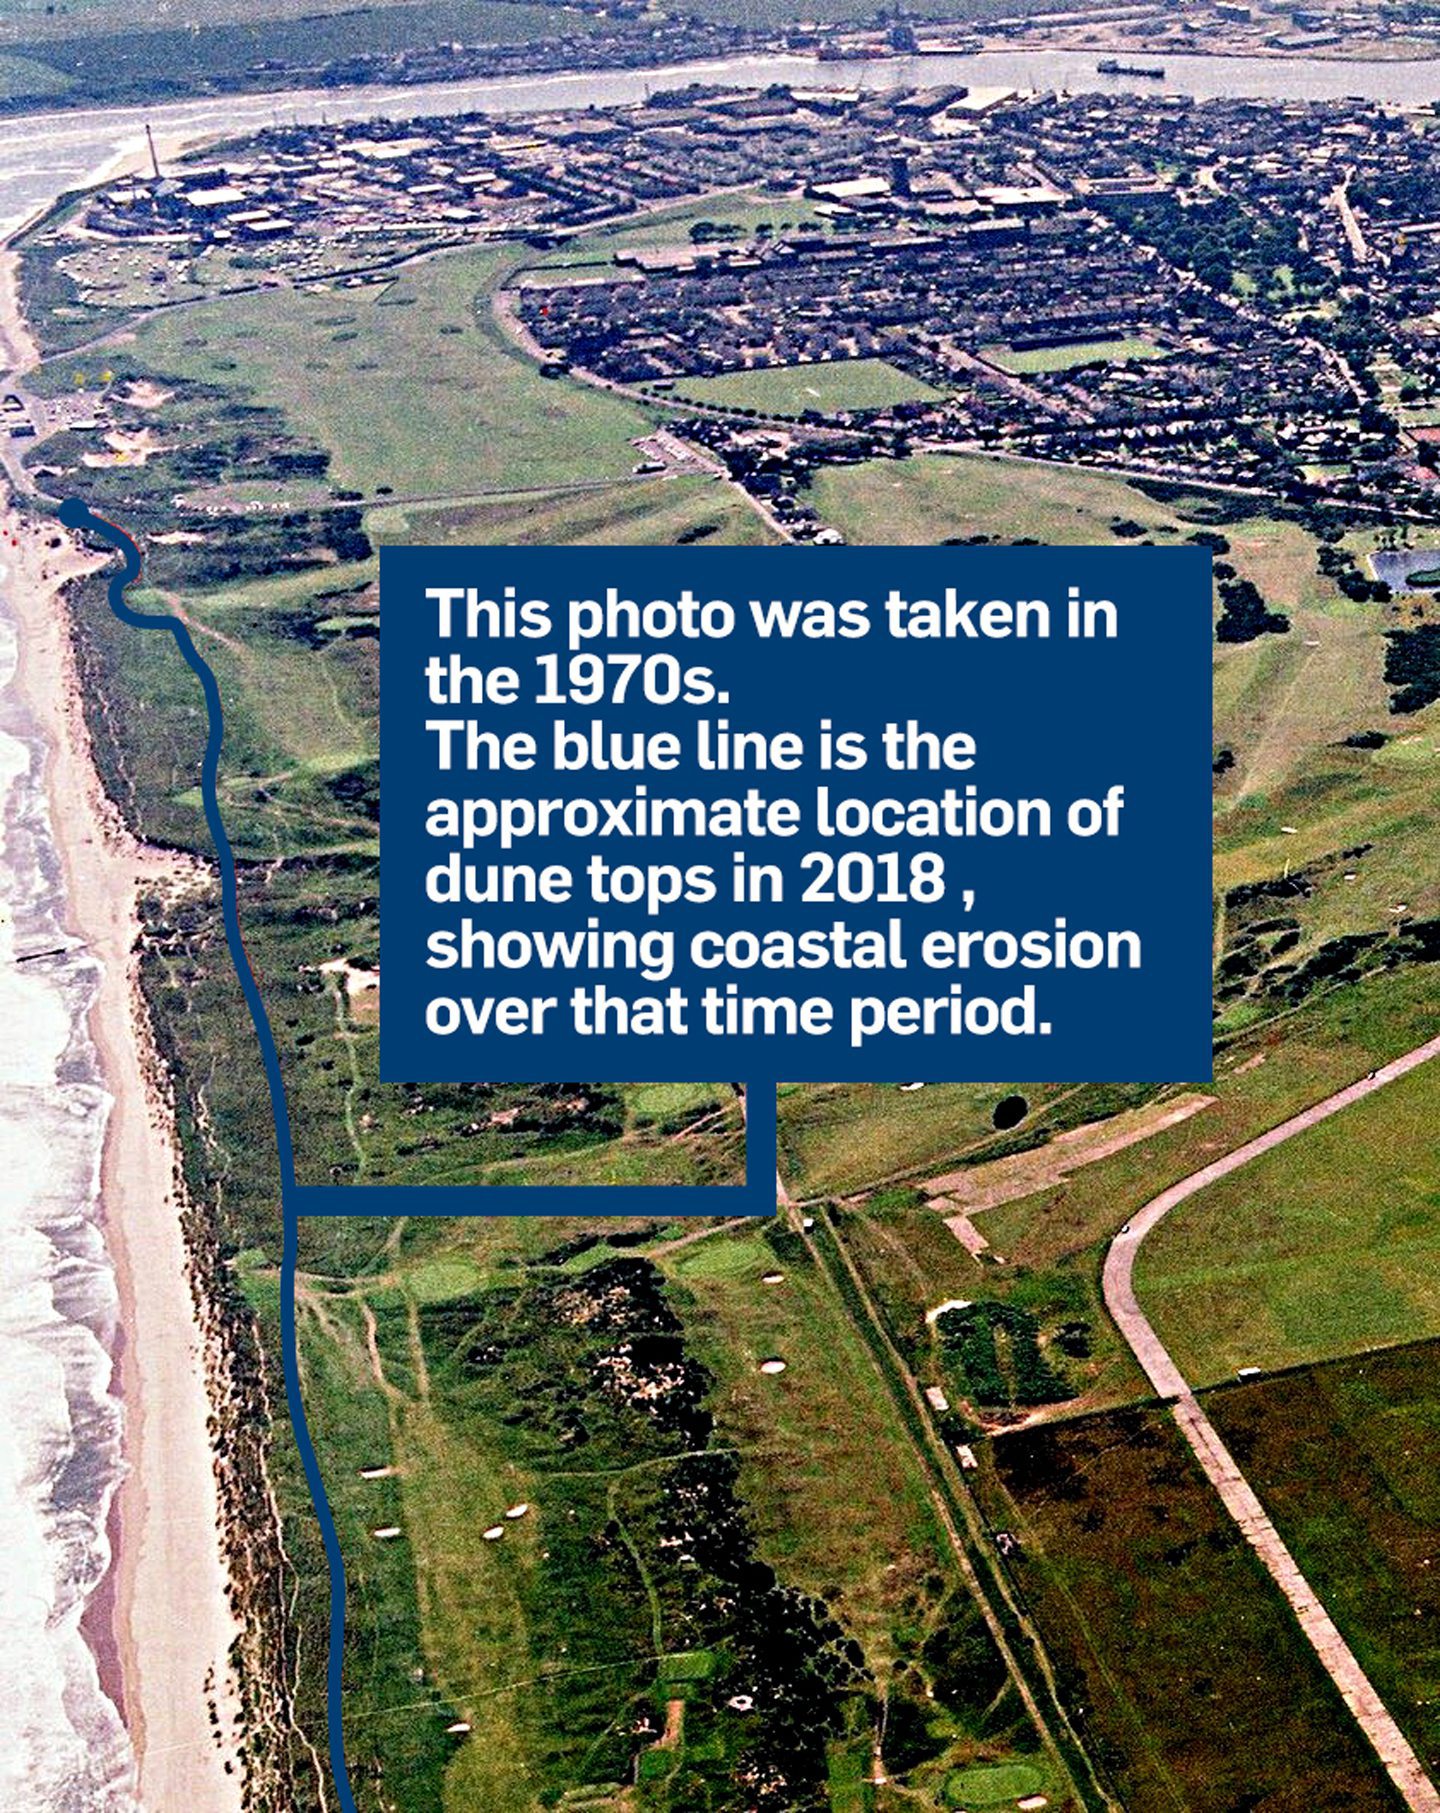 a photo of Montrose Links from the 1970s, showing the coastal erosion between then and now